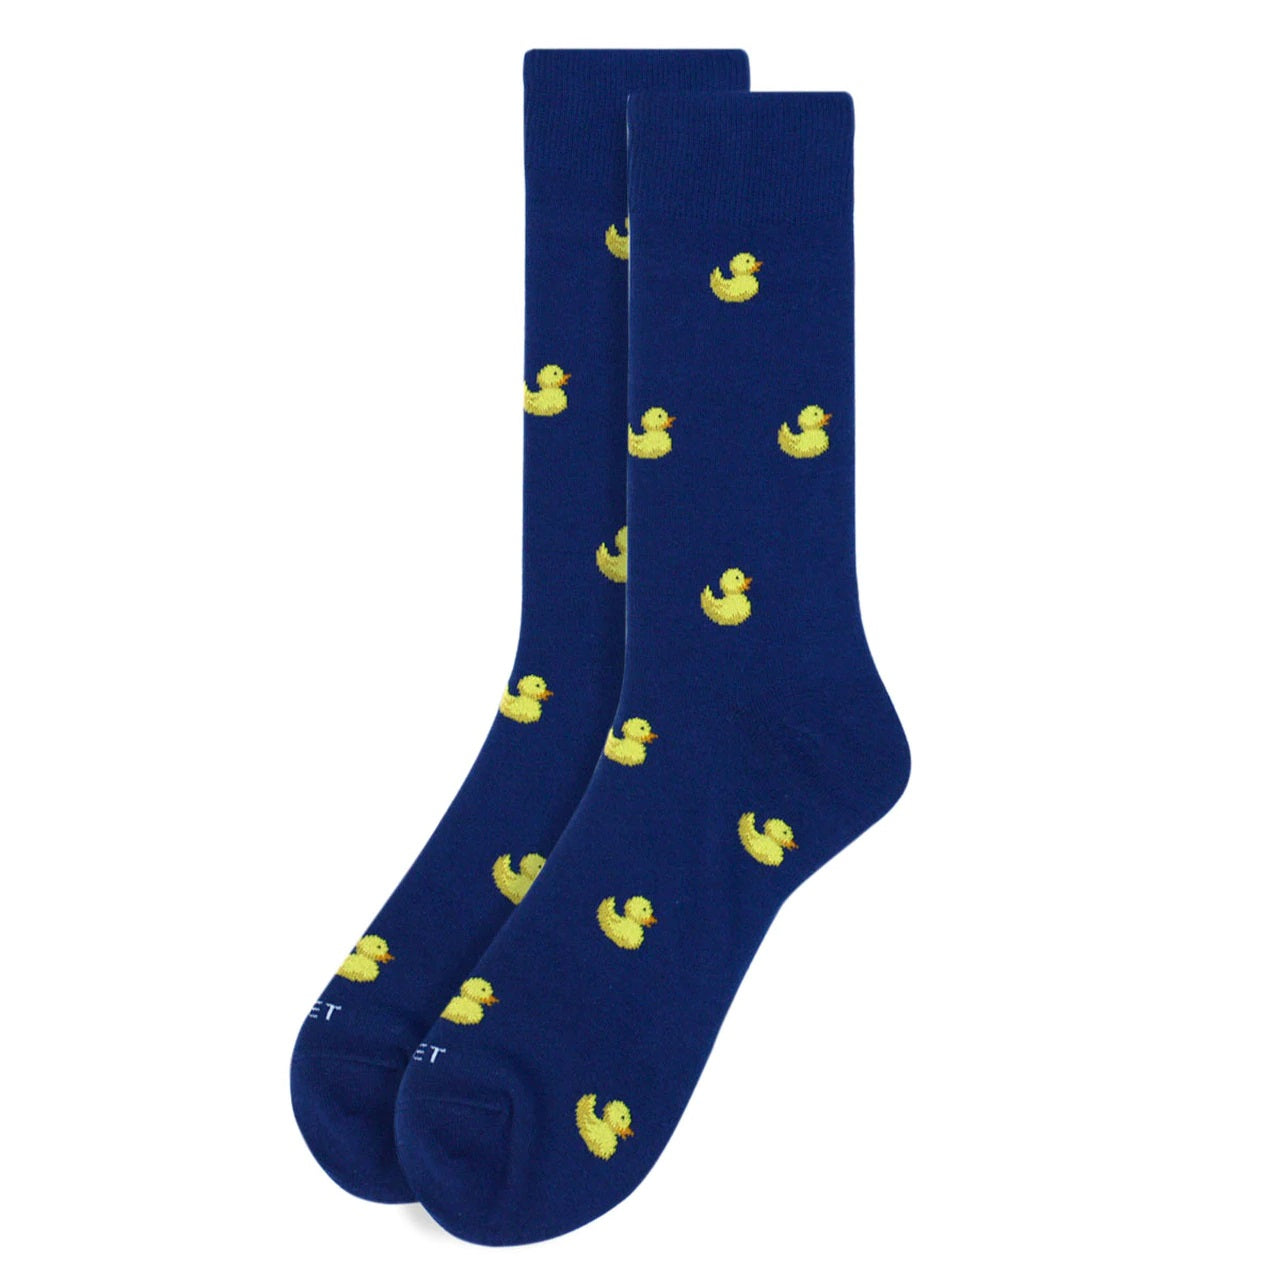 MashasCorner.com   Men's Rubber Duck Premium Collection Novelty Socks  Who said that socks have to be boring? Colorful, novelty or funny socks is the way to go. That’s why we have a wide range of different colors and design for the different passions and interest. They could be your perfect gift choices for all occasions.  78% Cotton, 19% Polyester, 3% spandex Our Finest Socks: Made from top quality material Sock size: 10-13 Shoe size: 6-12.5 Machine wash, tumble dry low Imported